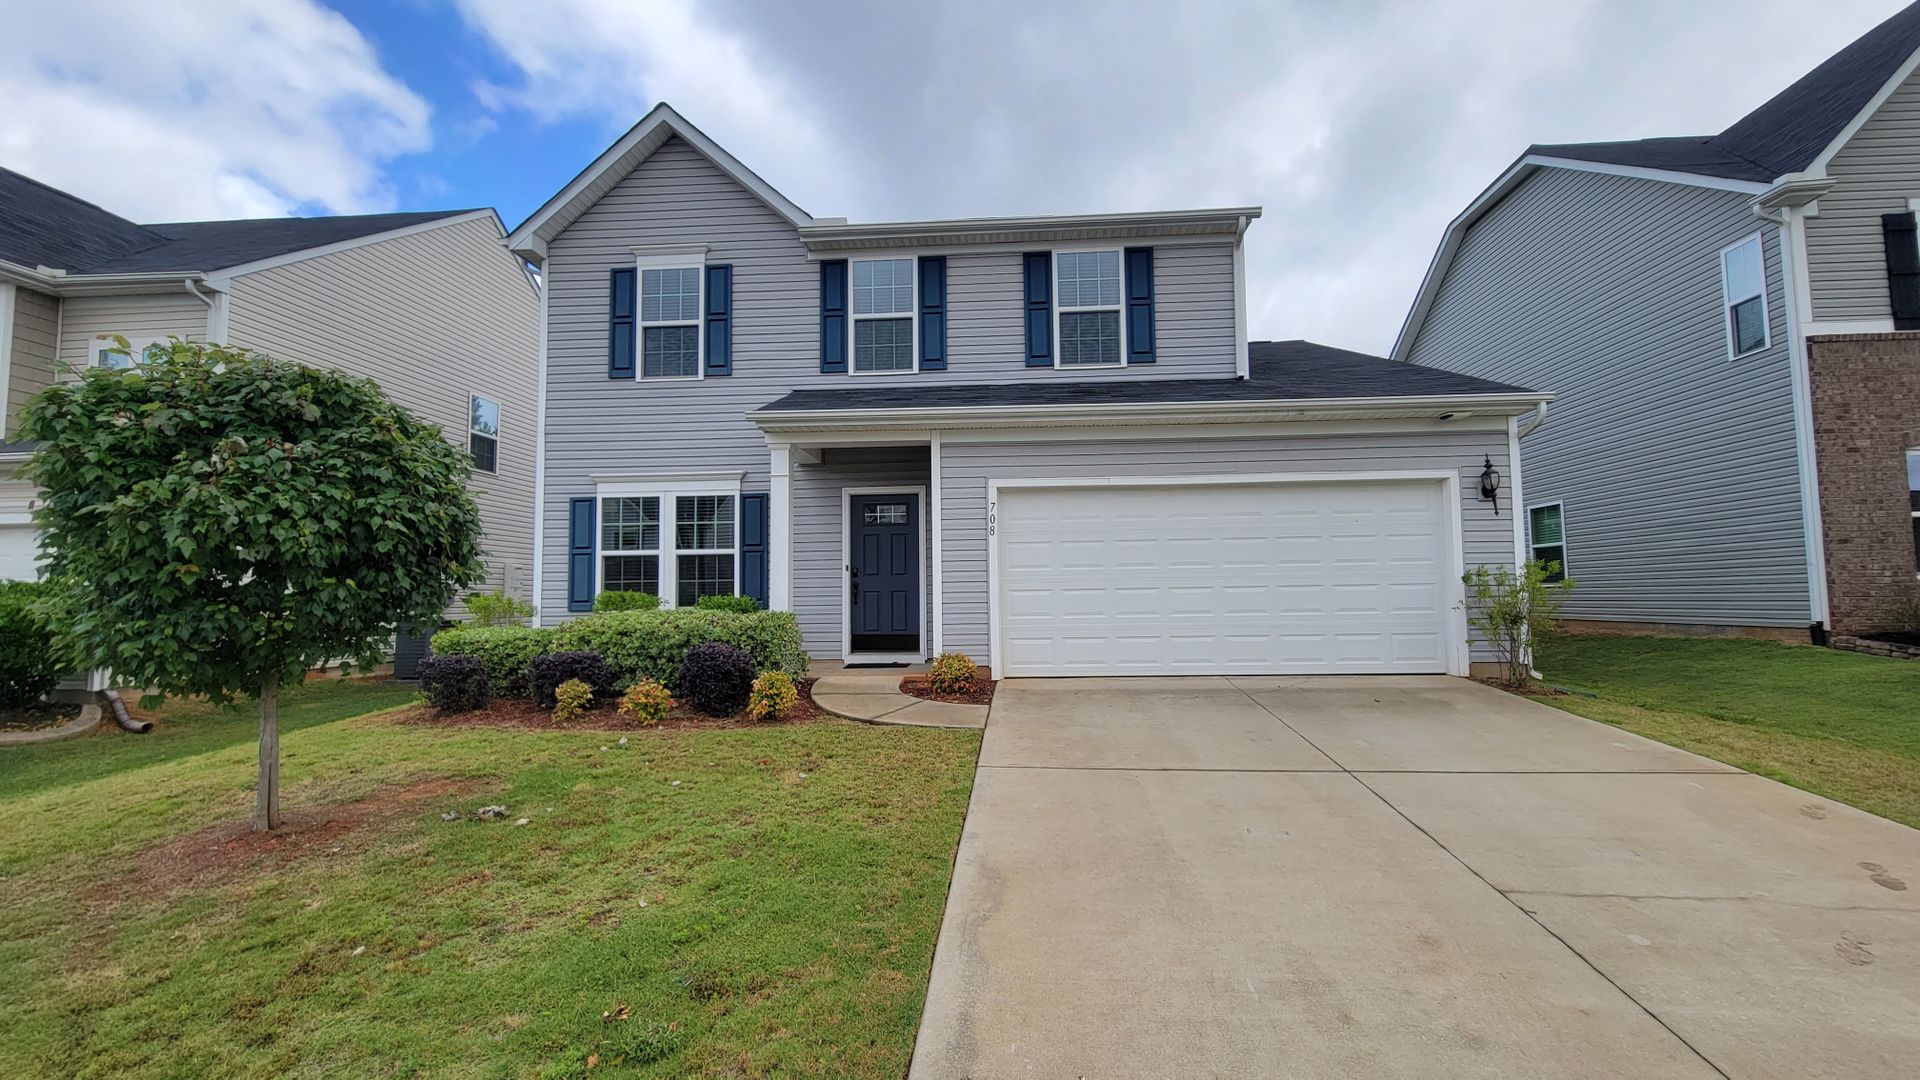 3 Bed, 2.5 Bath Home in Greer is Available